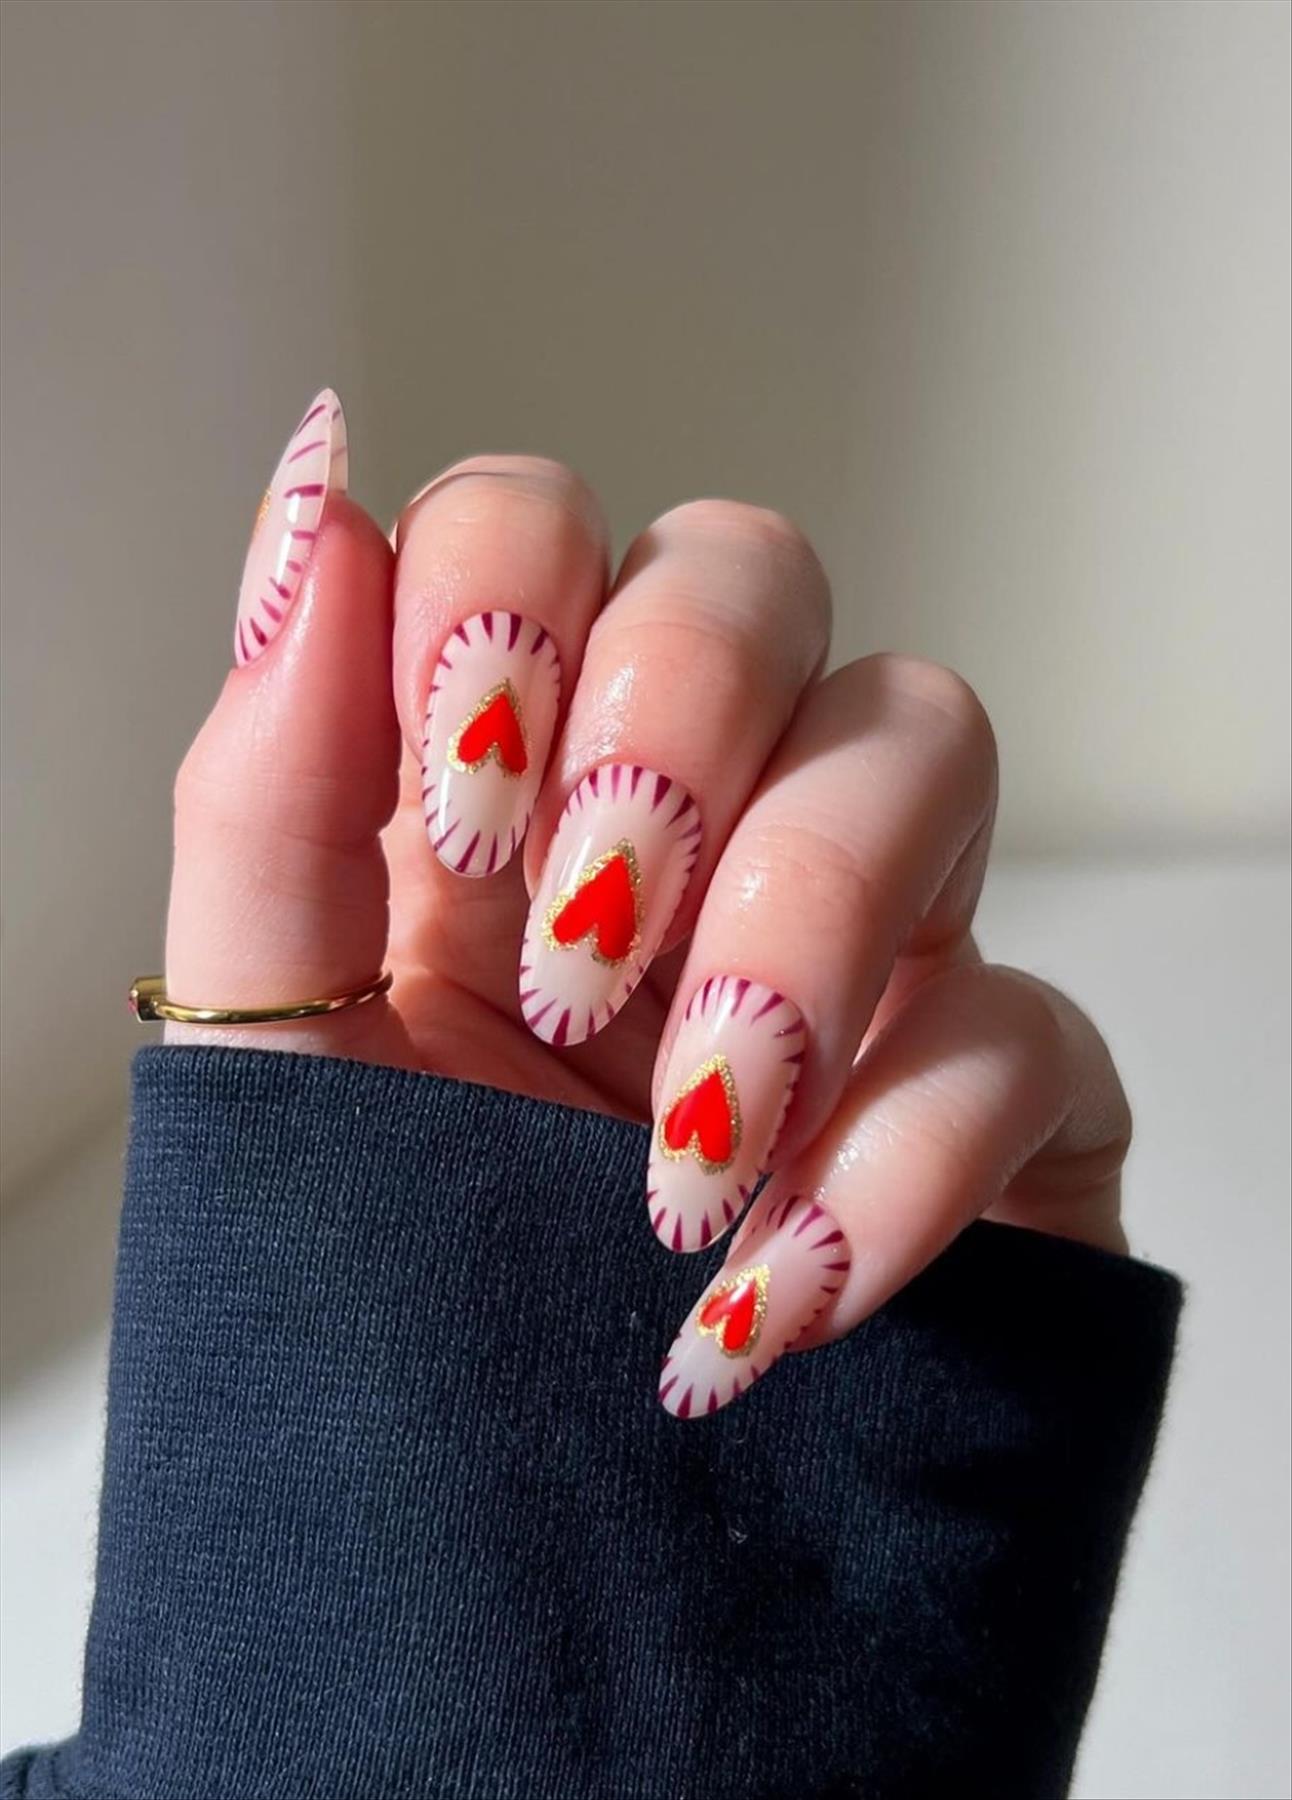 Best short Galentine's Day nail designs to copy now